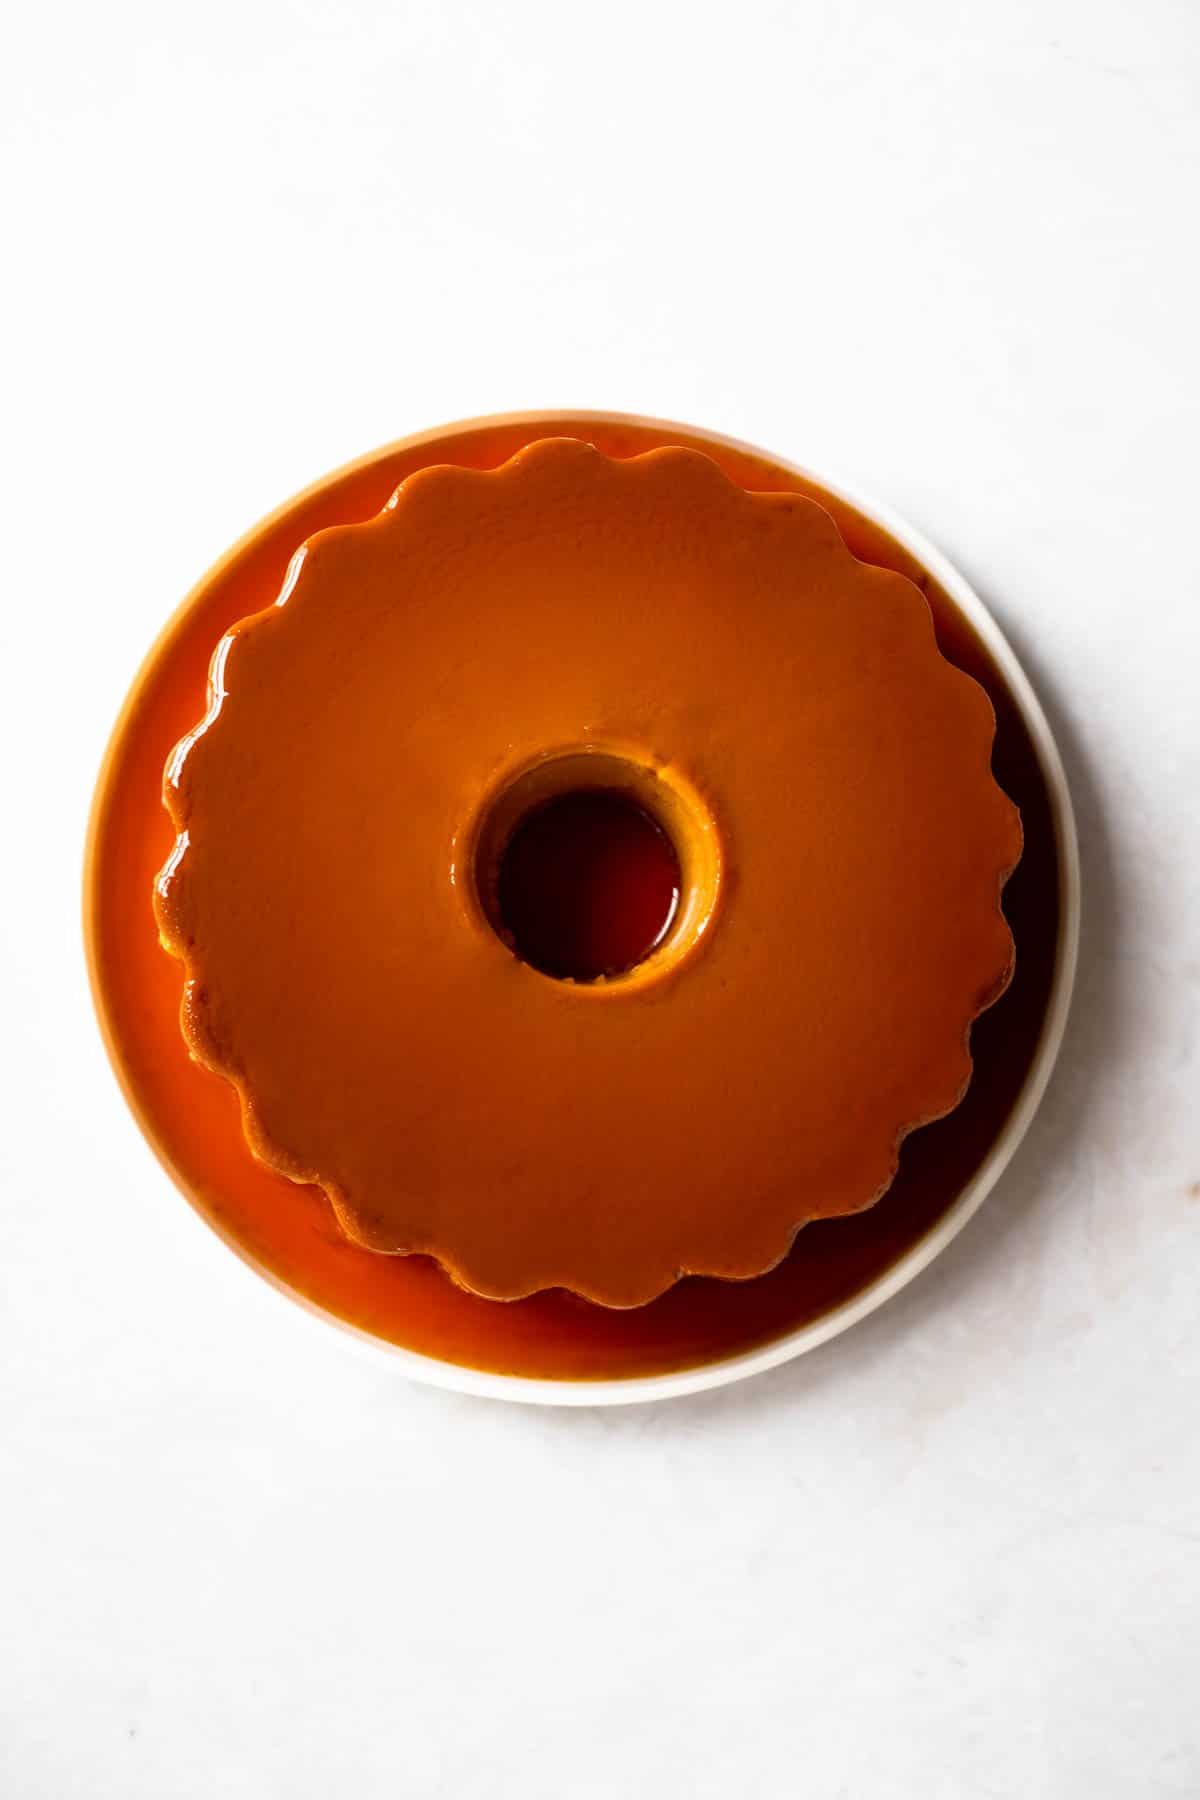 un-molded flan on a plate with rich, amber-colored caramel syrup